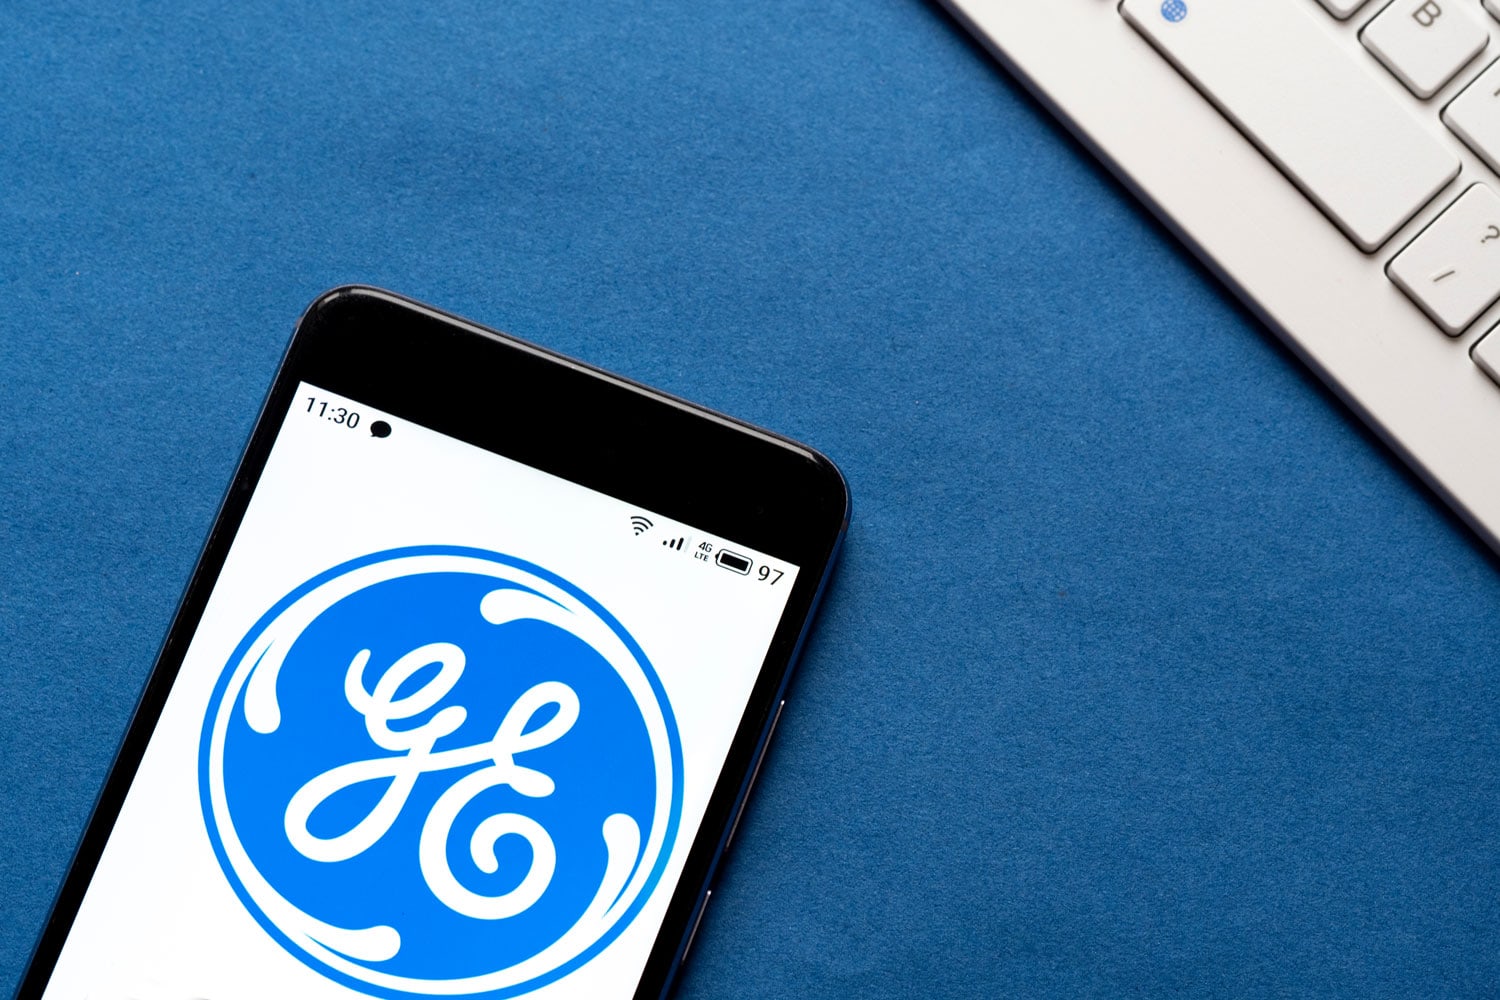 Launching General Electric app